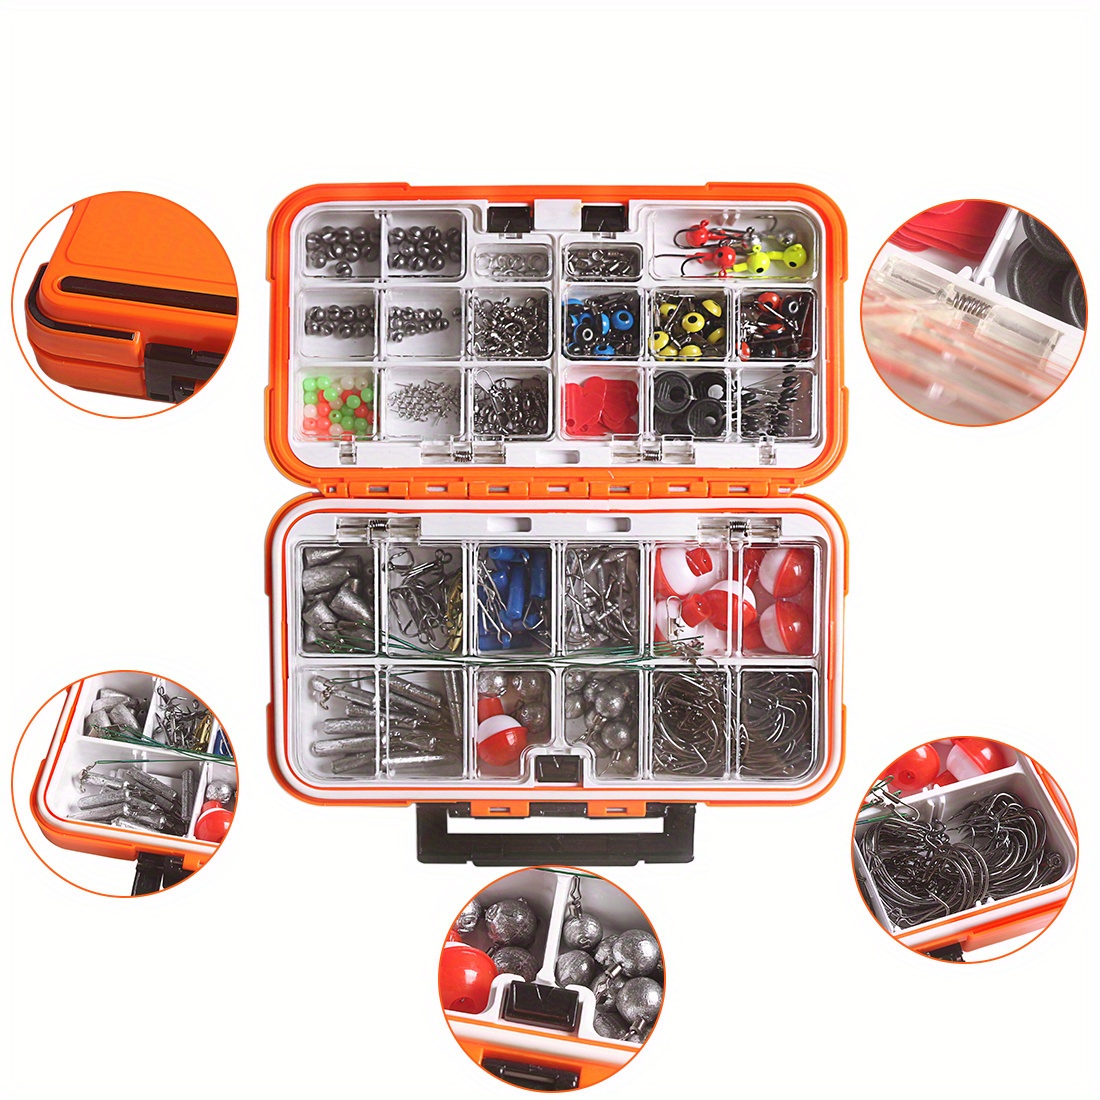 343pcs Complete Fishing Kit with Tackle Box - Includes Hooks, Weights,  Swivels, Slides, Lures, and Bait Box - Perfect for Freshwater and Saltwater  Fis